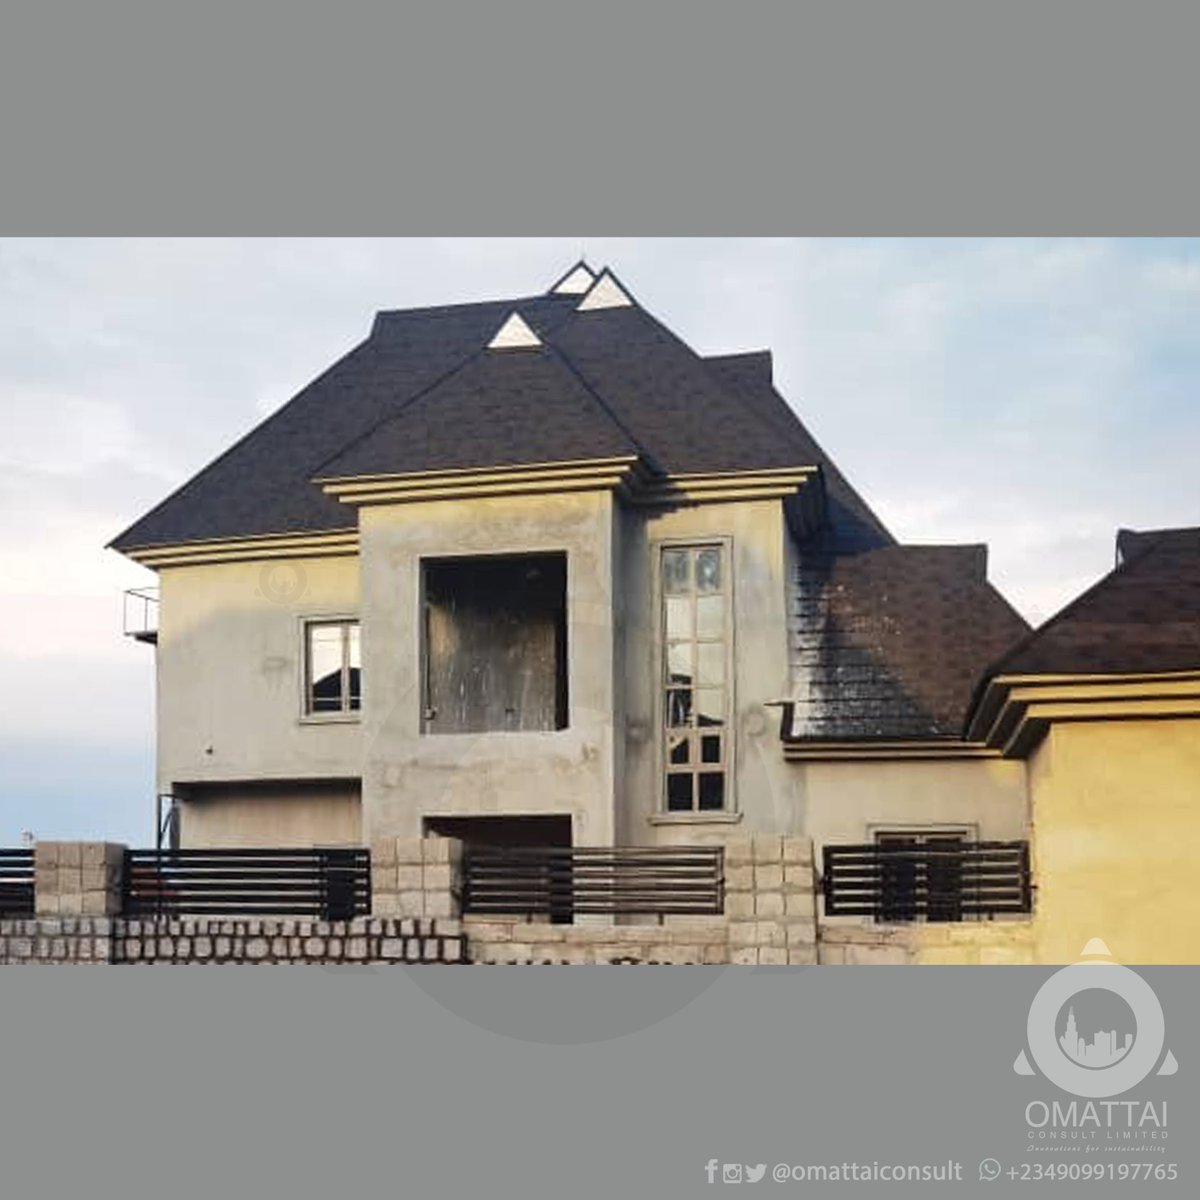 #Workinprogress
Design and Build with @omattaiconsult

Send a DM.
Call or Whatsapp +2349099197765
_______________________
#Architecture #buildingdesign
#buildingplans #residentialbuilding
#planning #urbanplanning #nigeriaarchitects #nigeriaplanners  #realestate #abujaarchitect